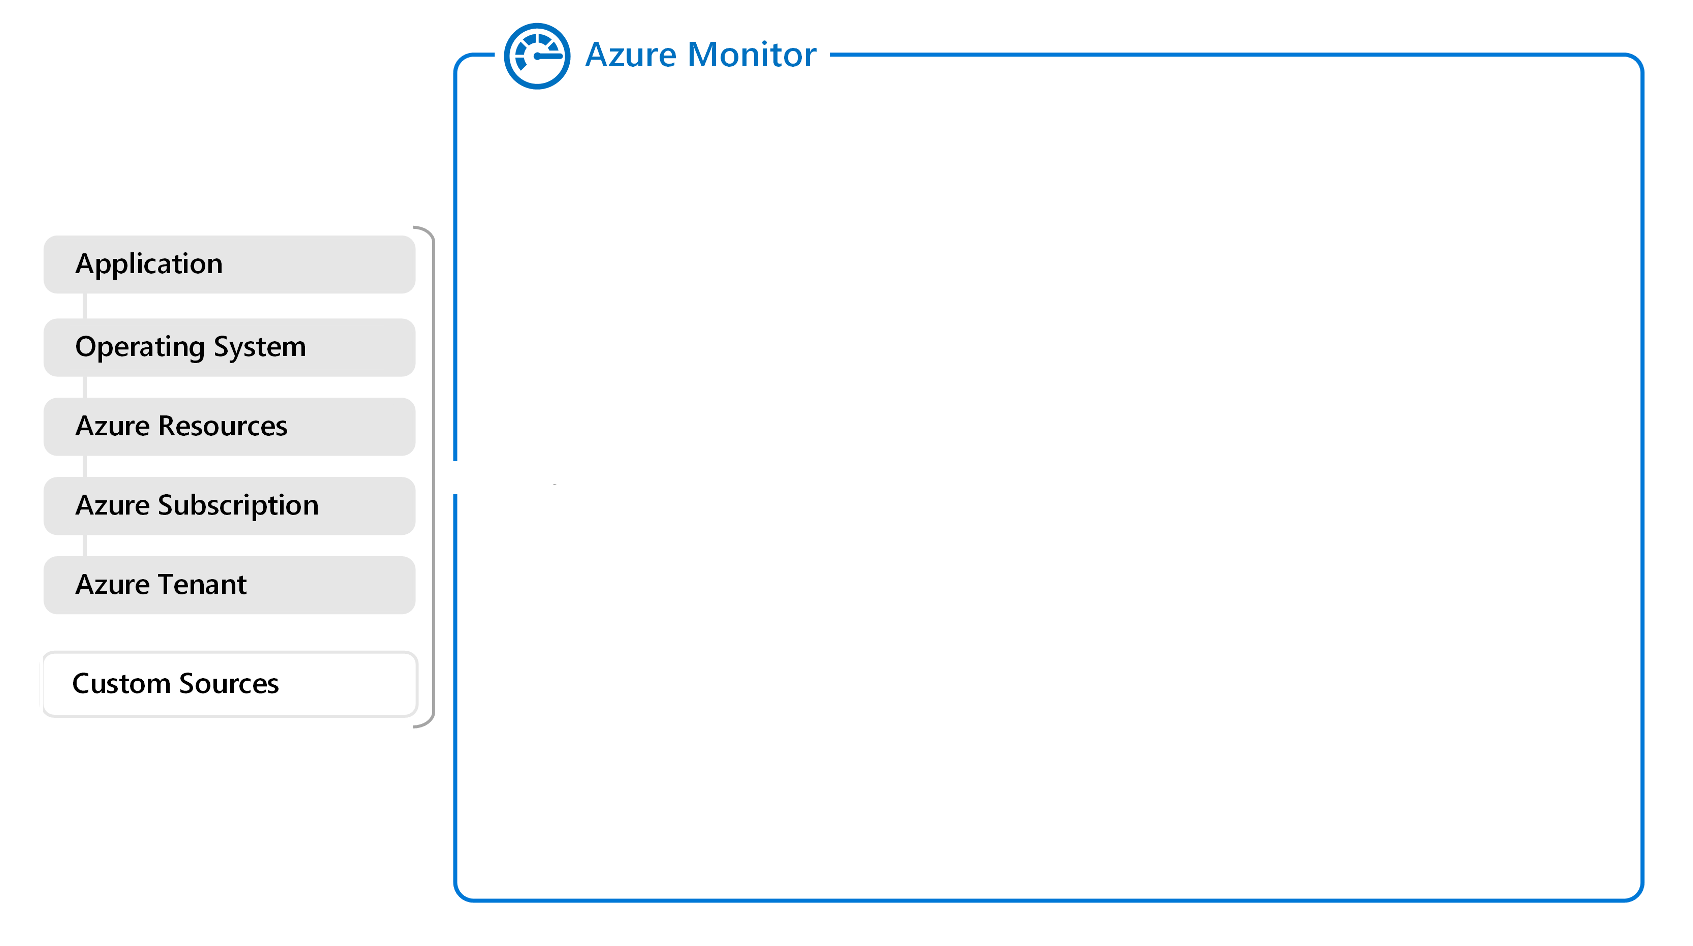 Diagram of a partial overview of Azure Monitor showing data sources.